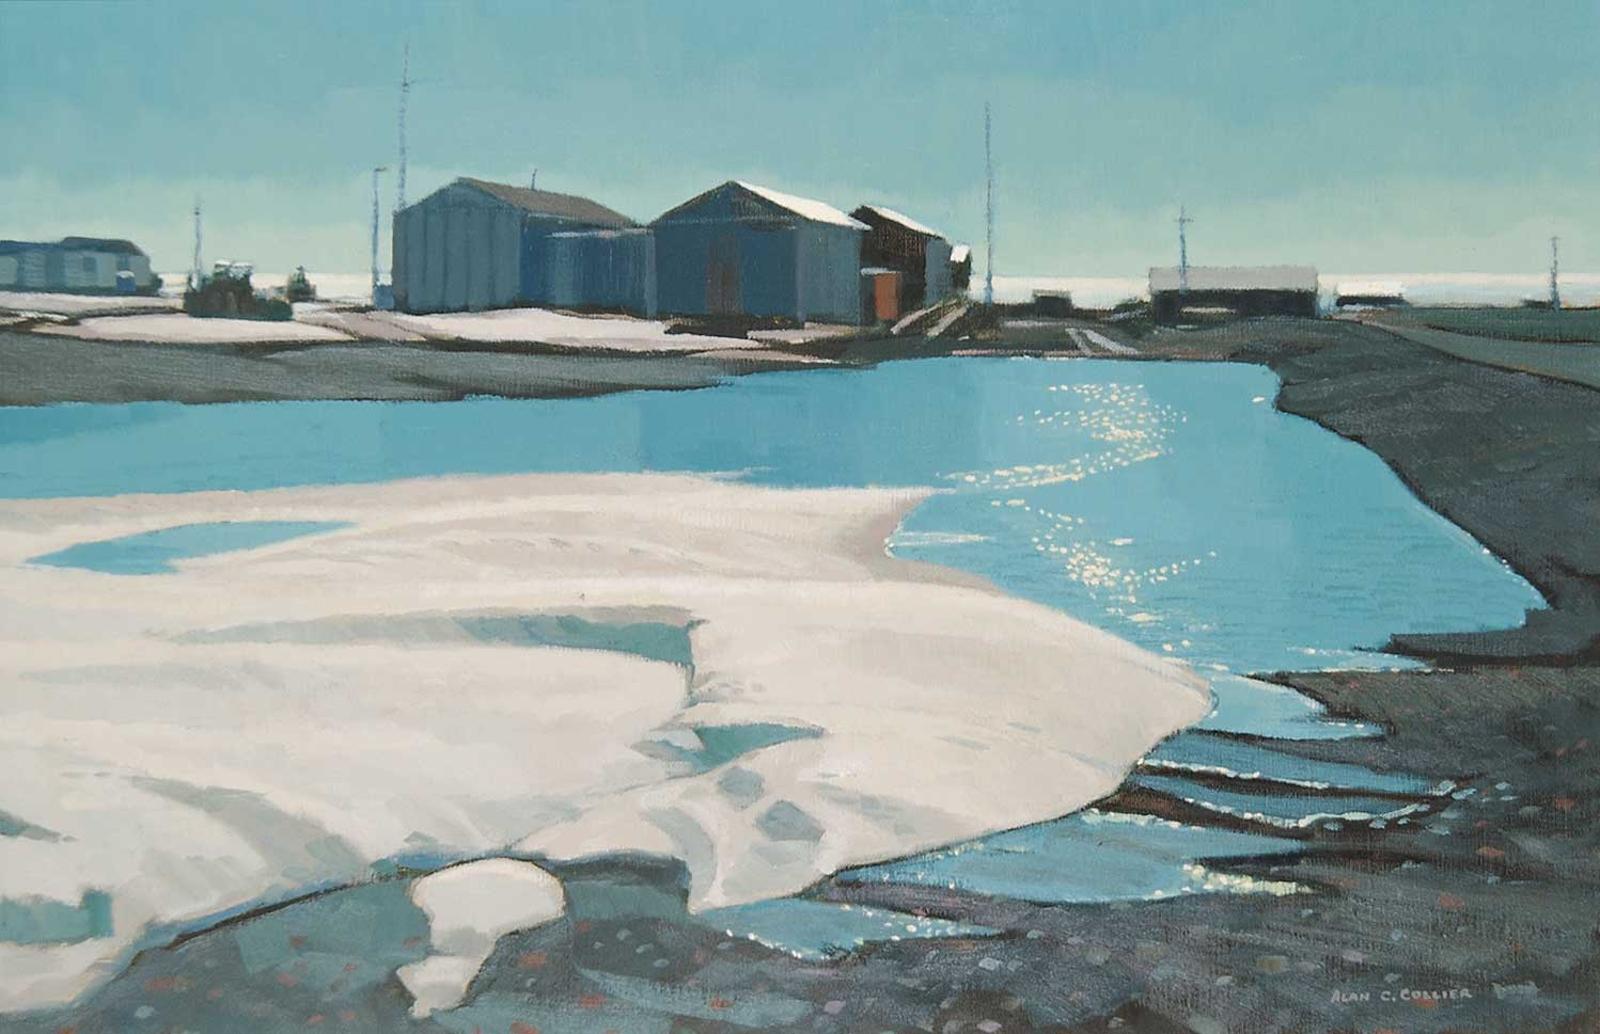 Alan Caswell Collier (1911-1990) - At Resolute, N.W.T